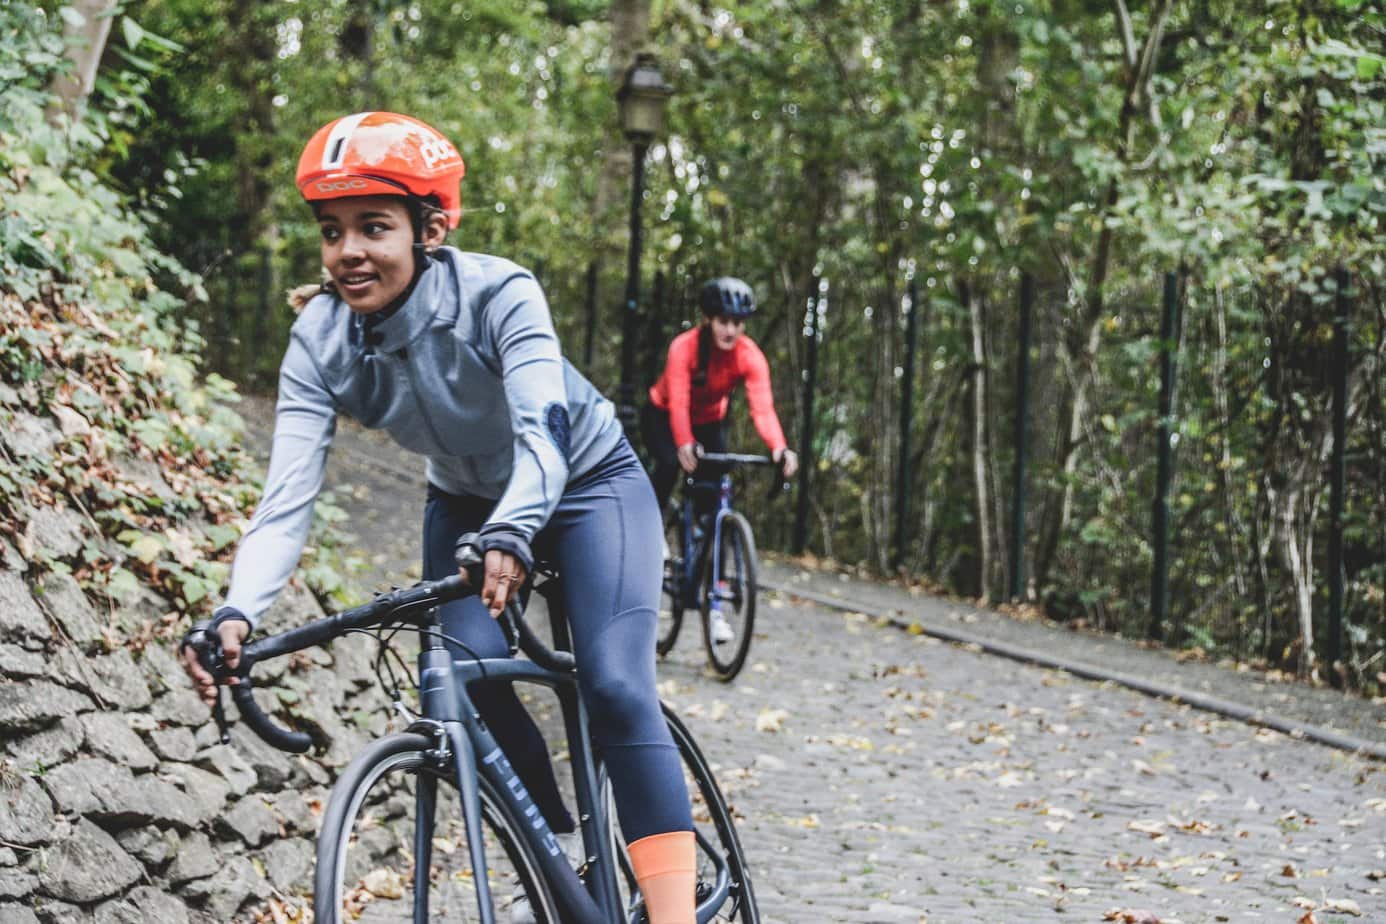 5 Women’s Cycling Gear You Don’t Want to Miss